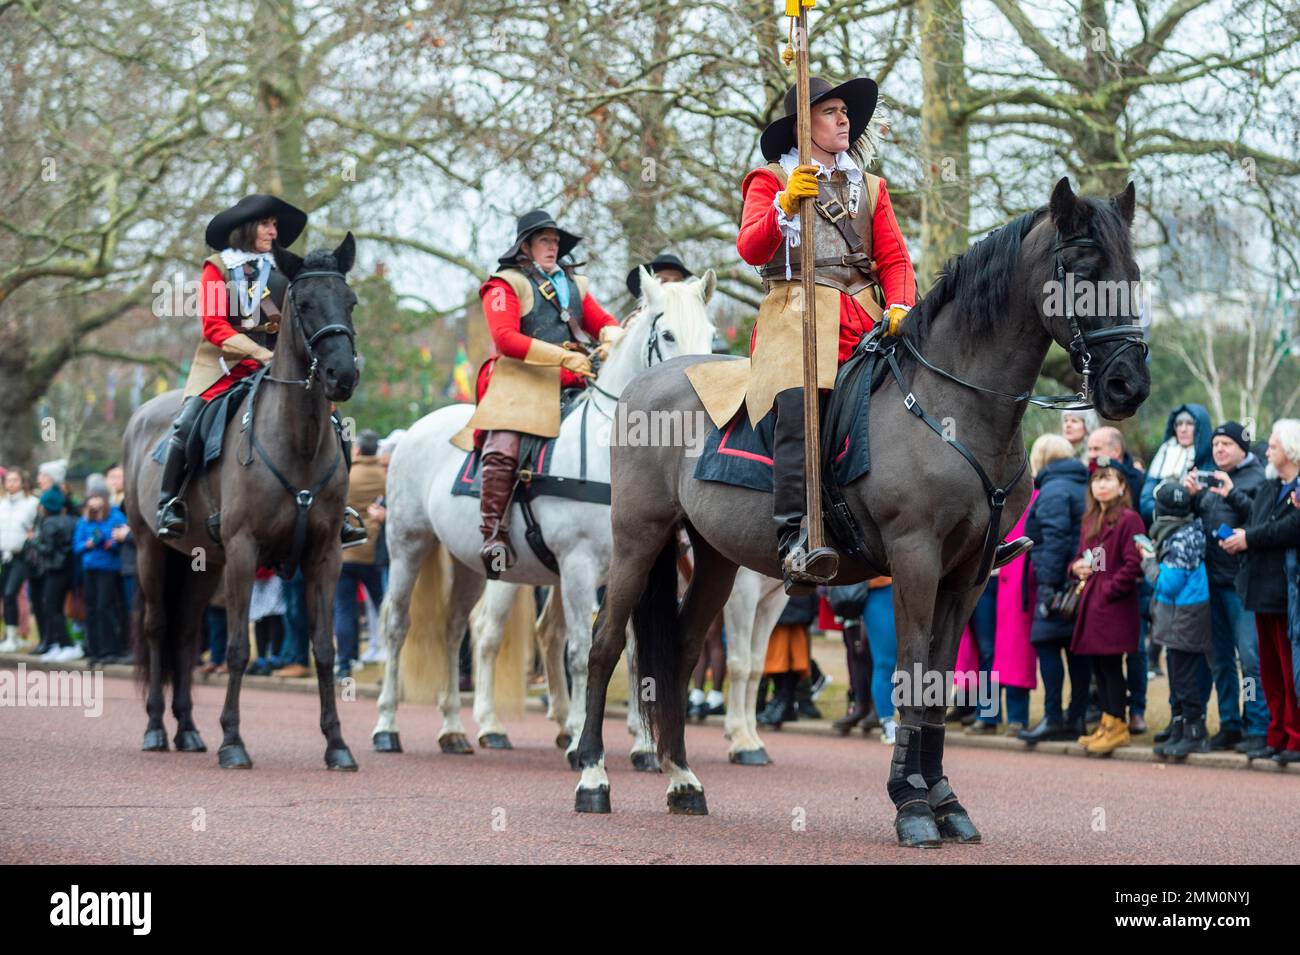 London, UK. 29 January 2023. Mounted members of The King's Army